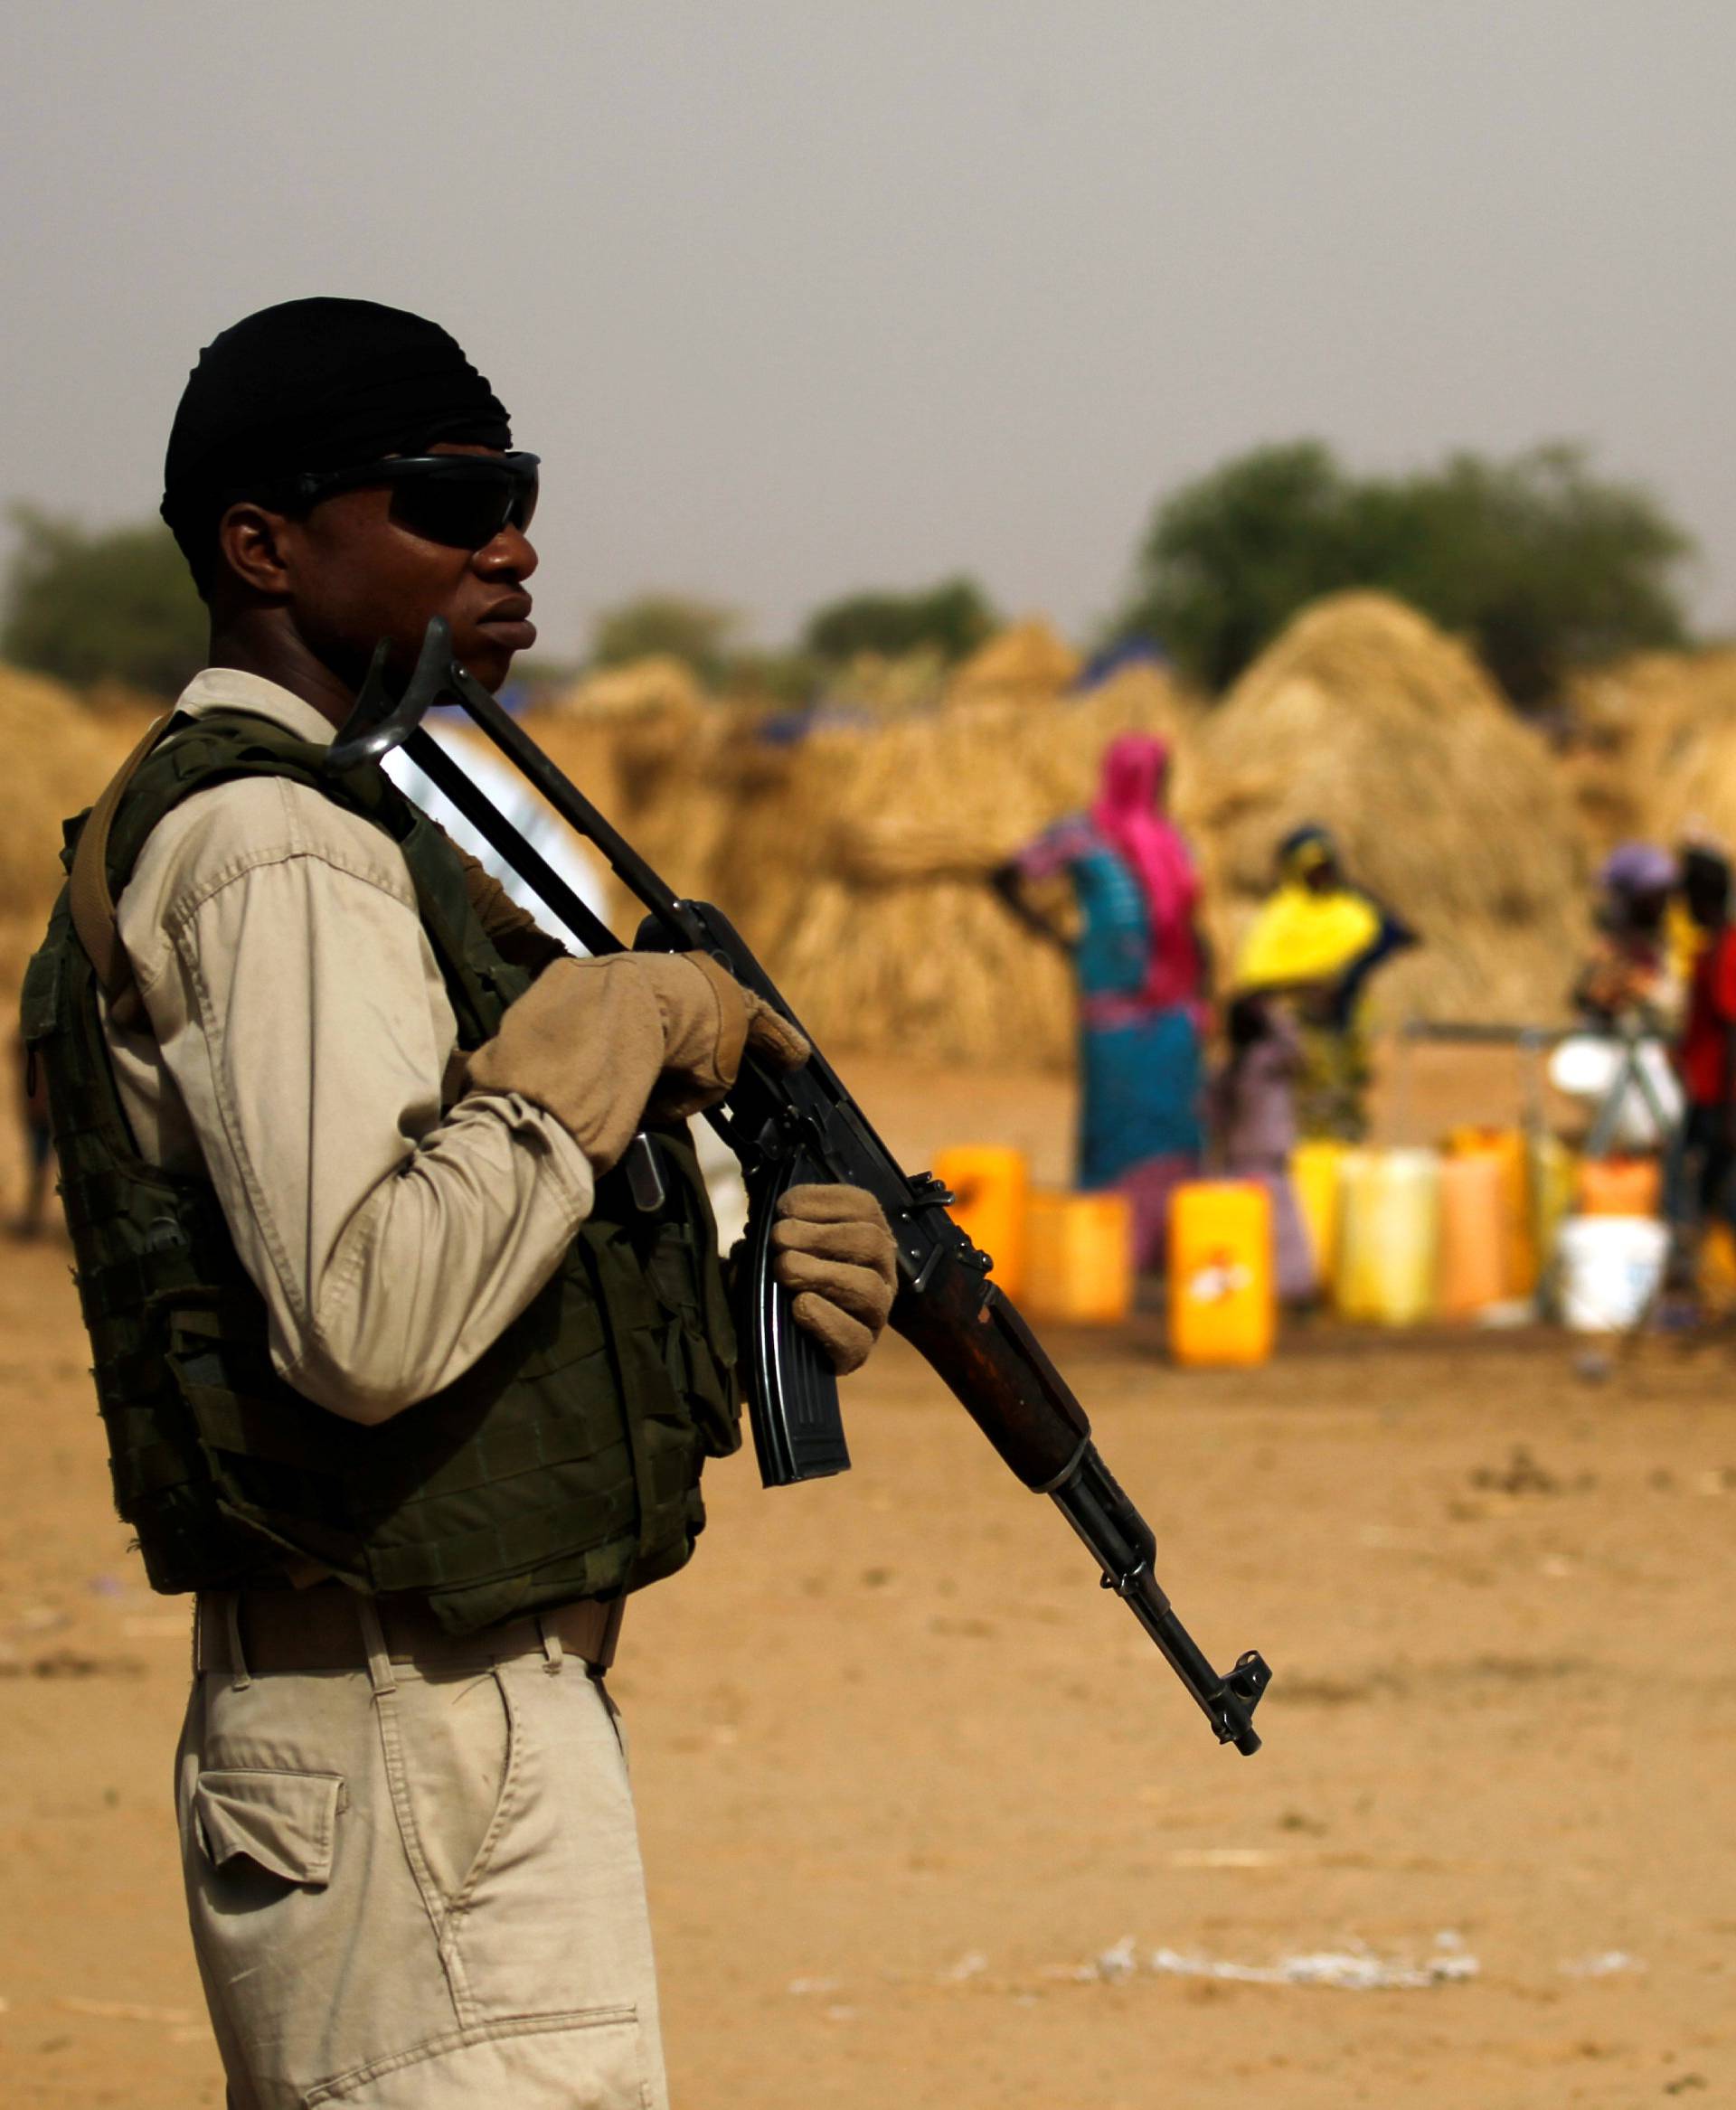 A Nigerien soldier stands guard in a camp of the city of Diffa during the visit of Niger's Interior Minister Mohamed Bazoum following attacks by Boko Haram fighters in the region of Diffa